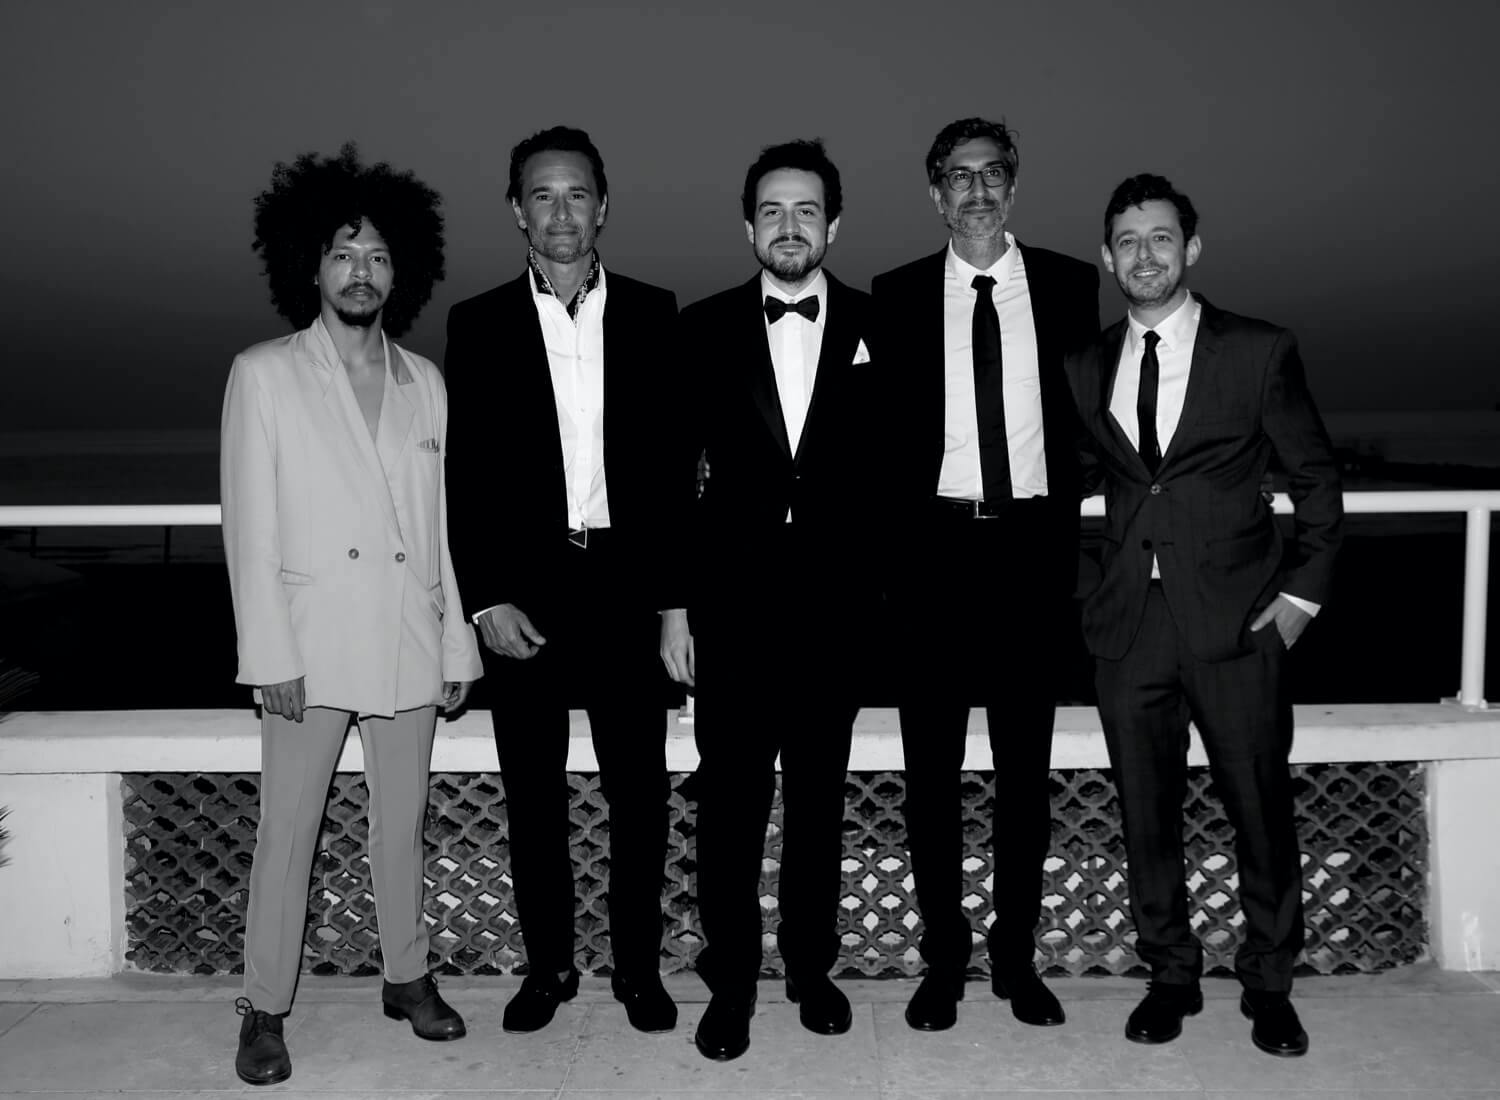 The cast of 7 Prisoners at the Venice Film Festival, 2021